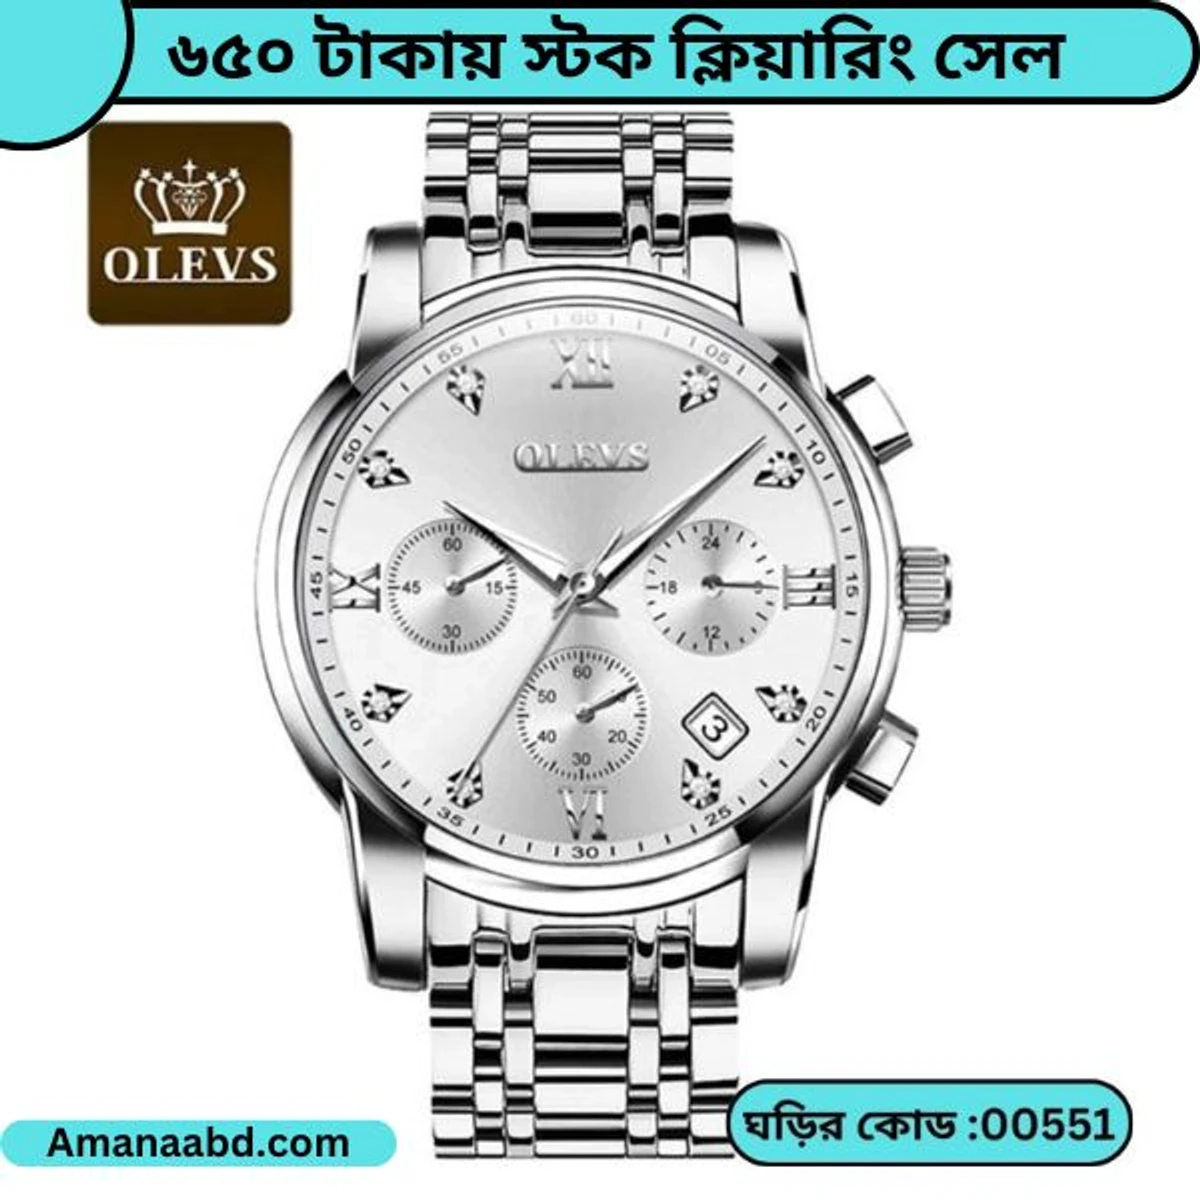 OLEVS MODEL 2858 Watch for Men Stainless Steel Watches - 2858 Full SILVER COOLER WATCH - MAN WATCH